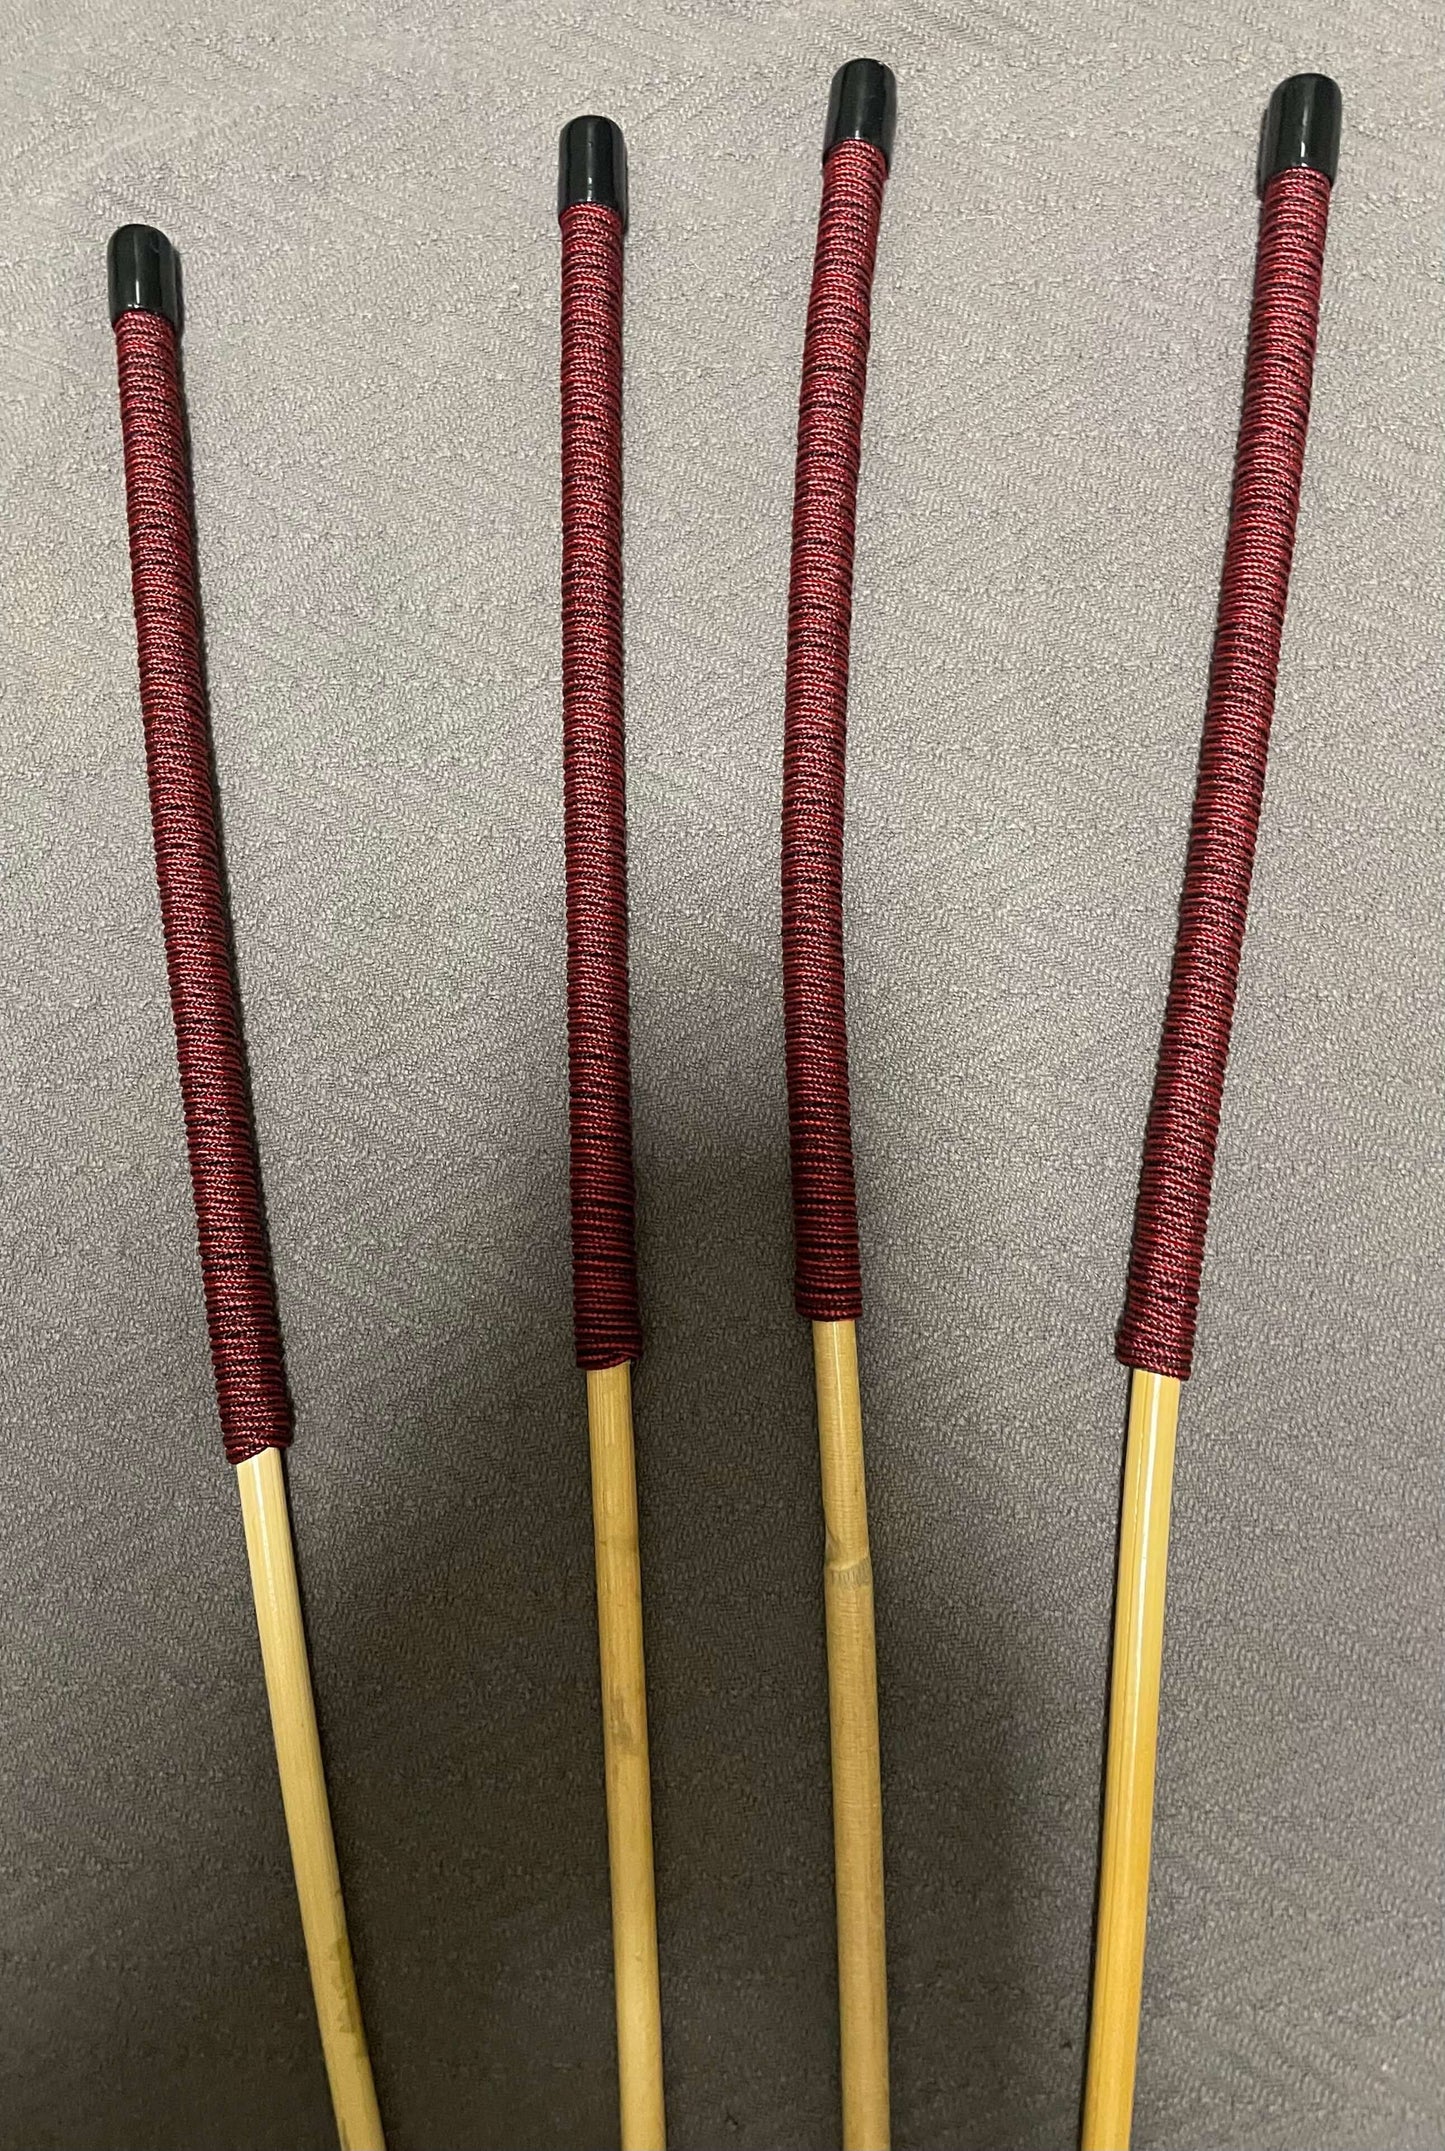 Set of 4 Classic Kooboo Rattan Punishment canes  with Liquorice Paracord Handles - 85 to 88 cms Length - 9.5 to 10.5 mm Diameters - Englishvice Canes